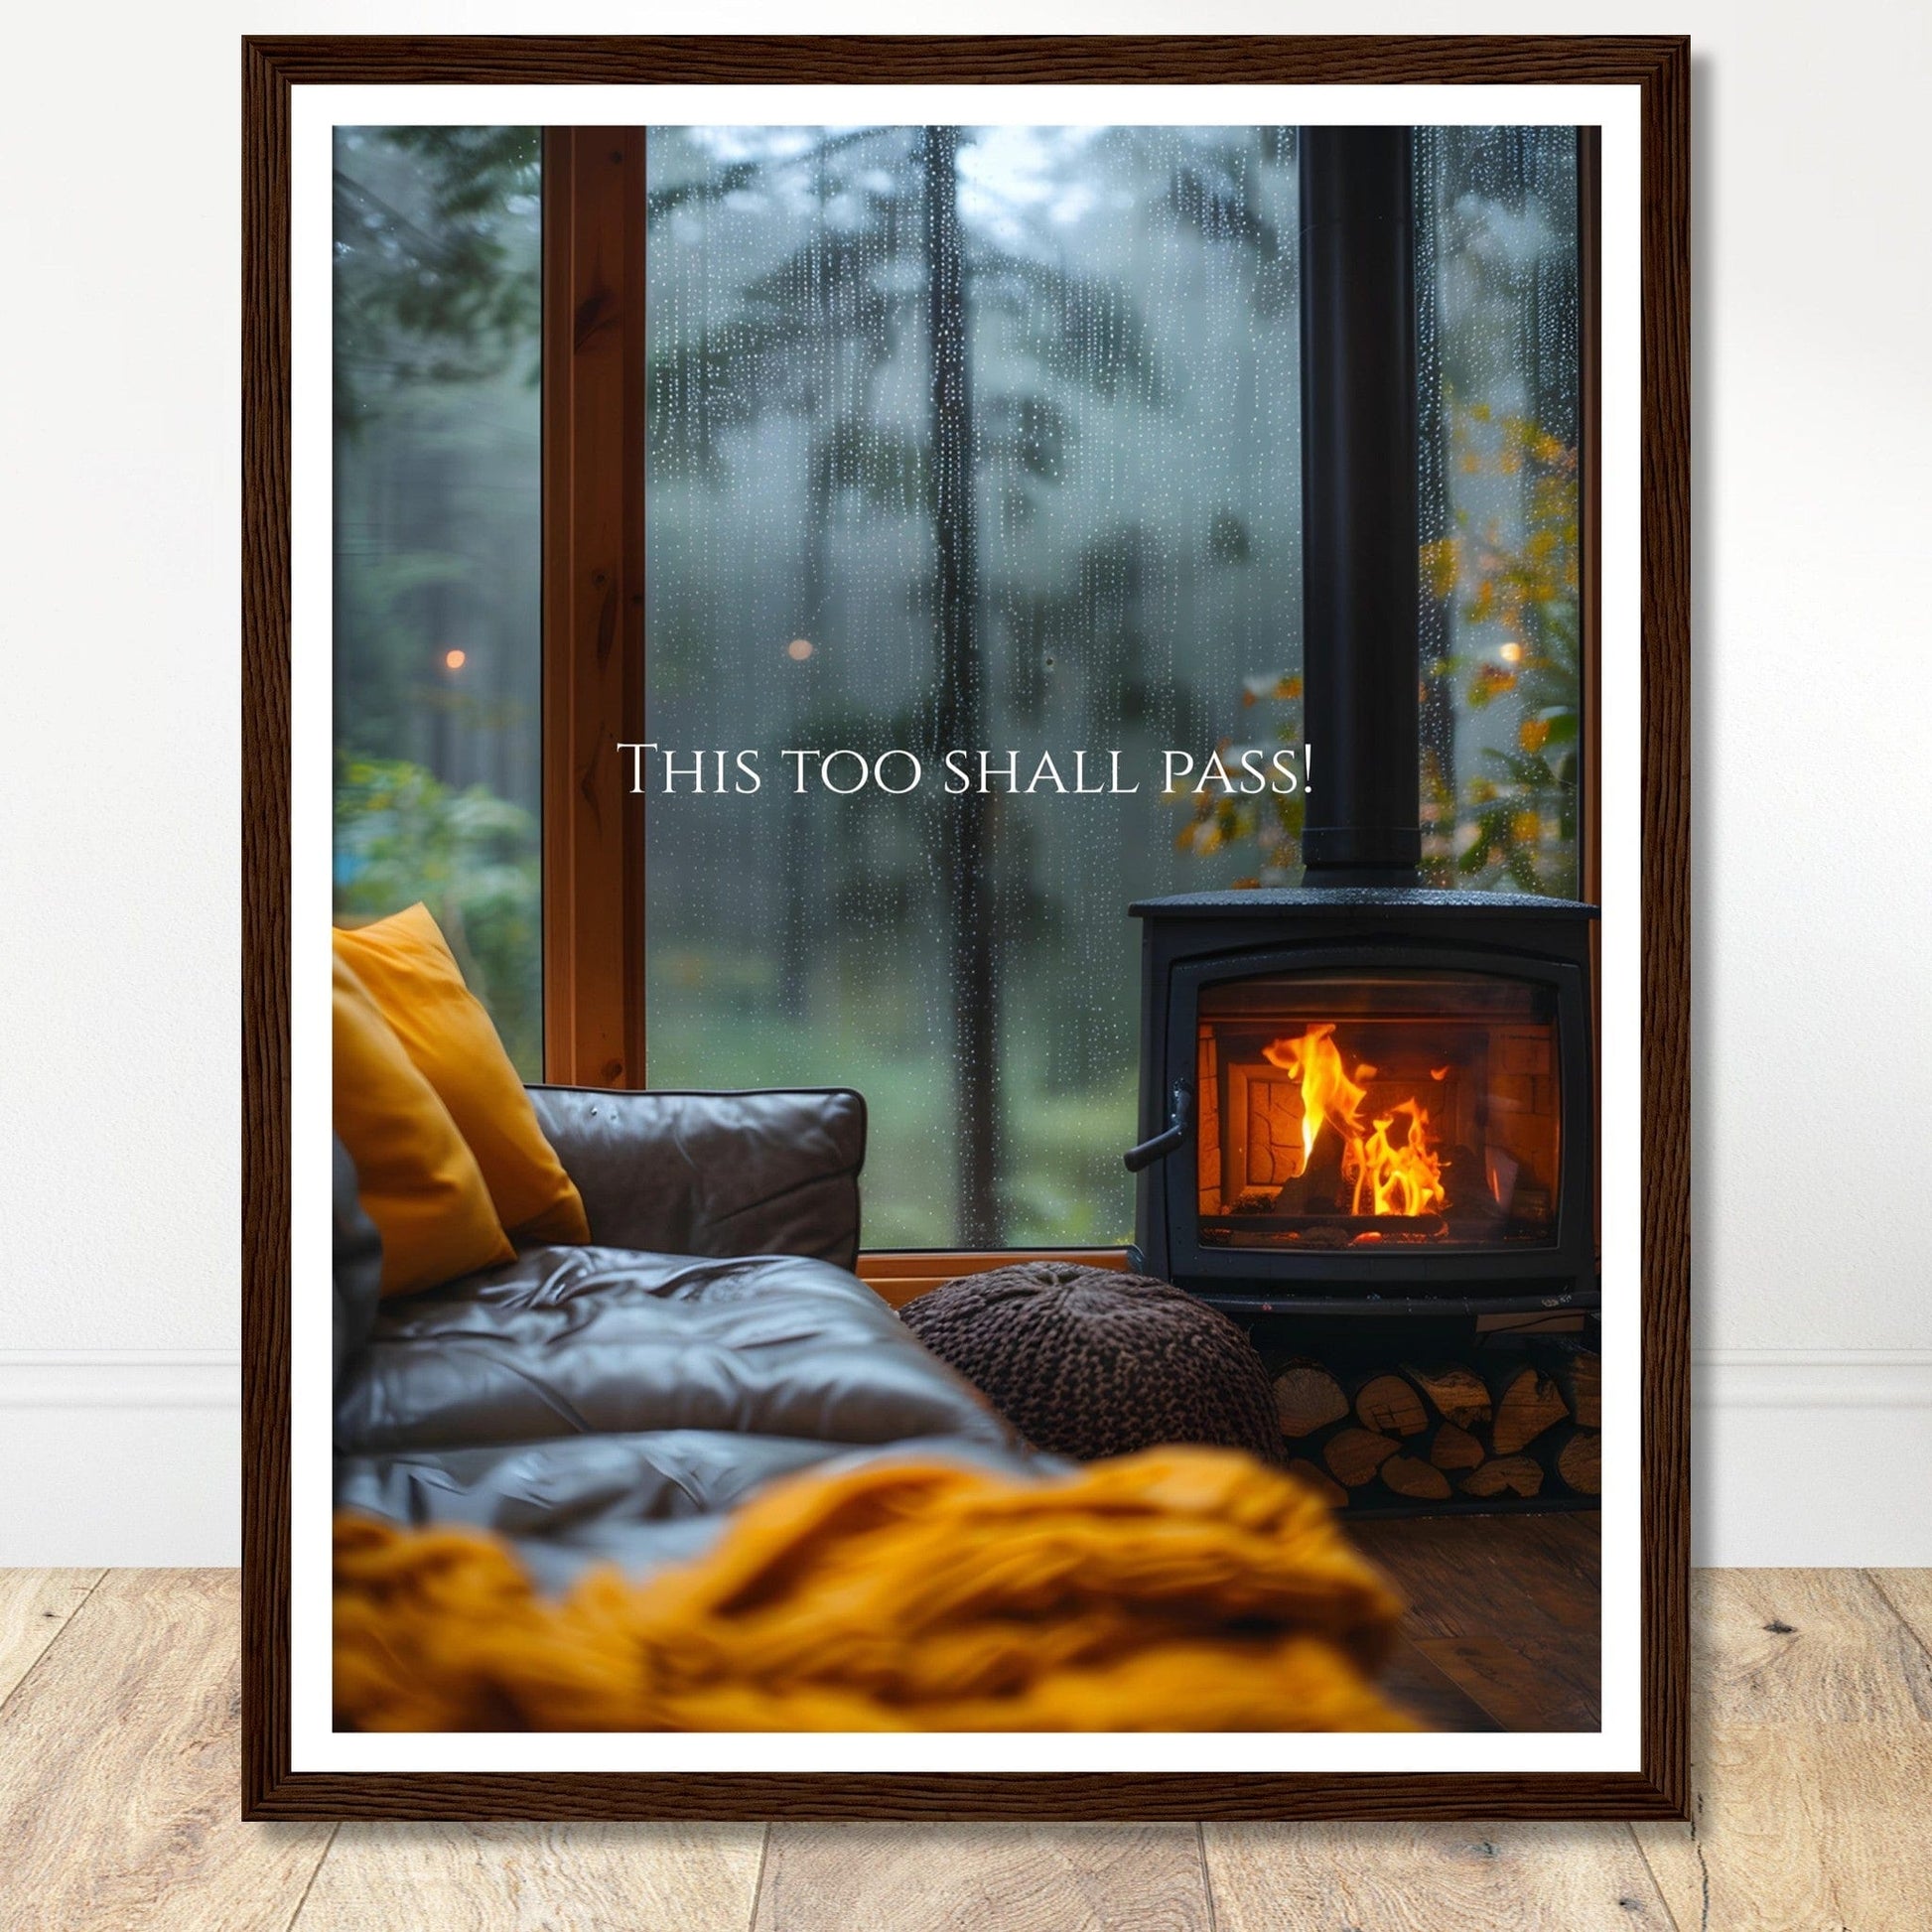 Coffee With My Father Print Material 40x50 cm / 16x20″ / Framed / Dark wood frame This Too Shall Pass - Custom Art